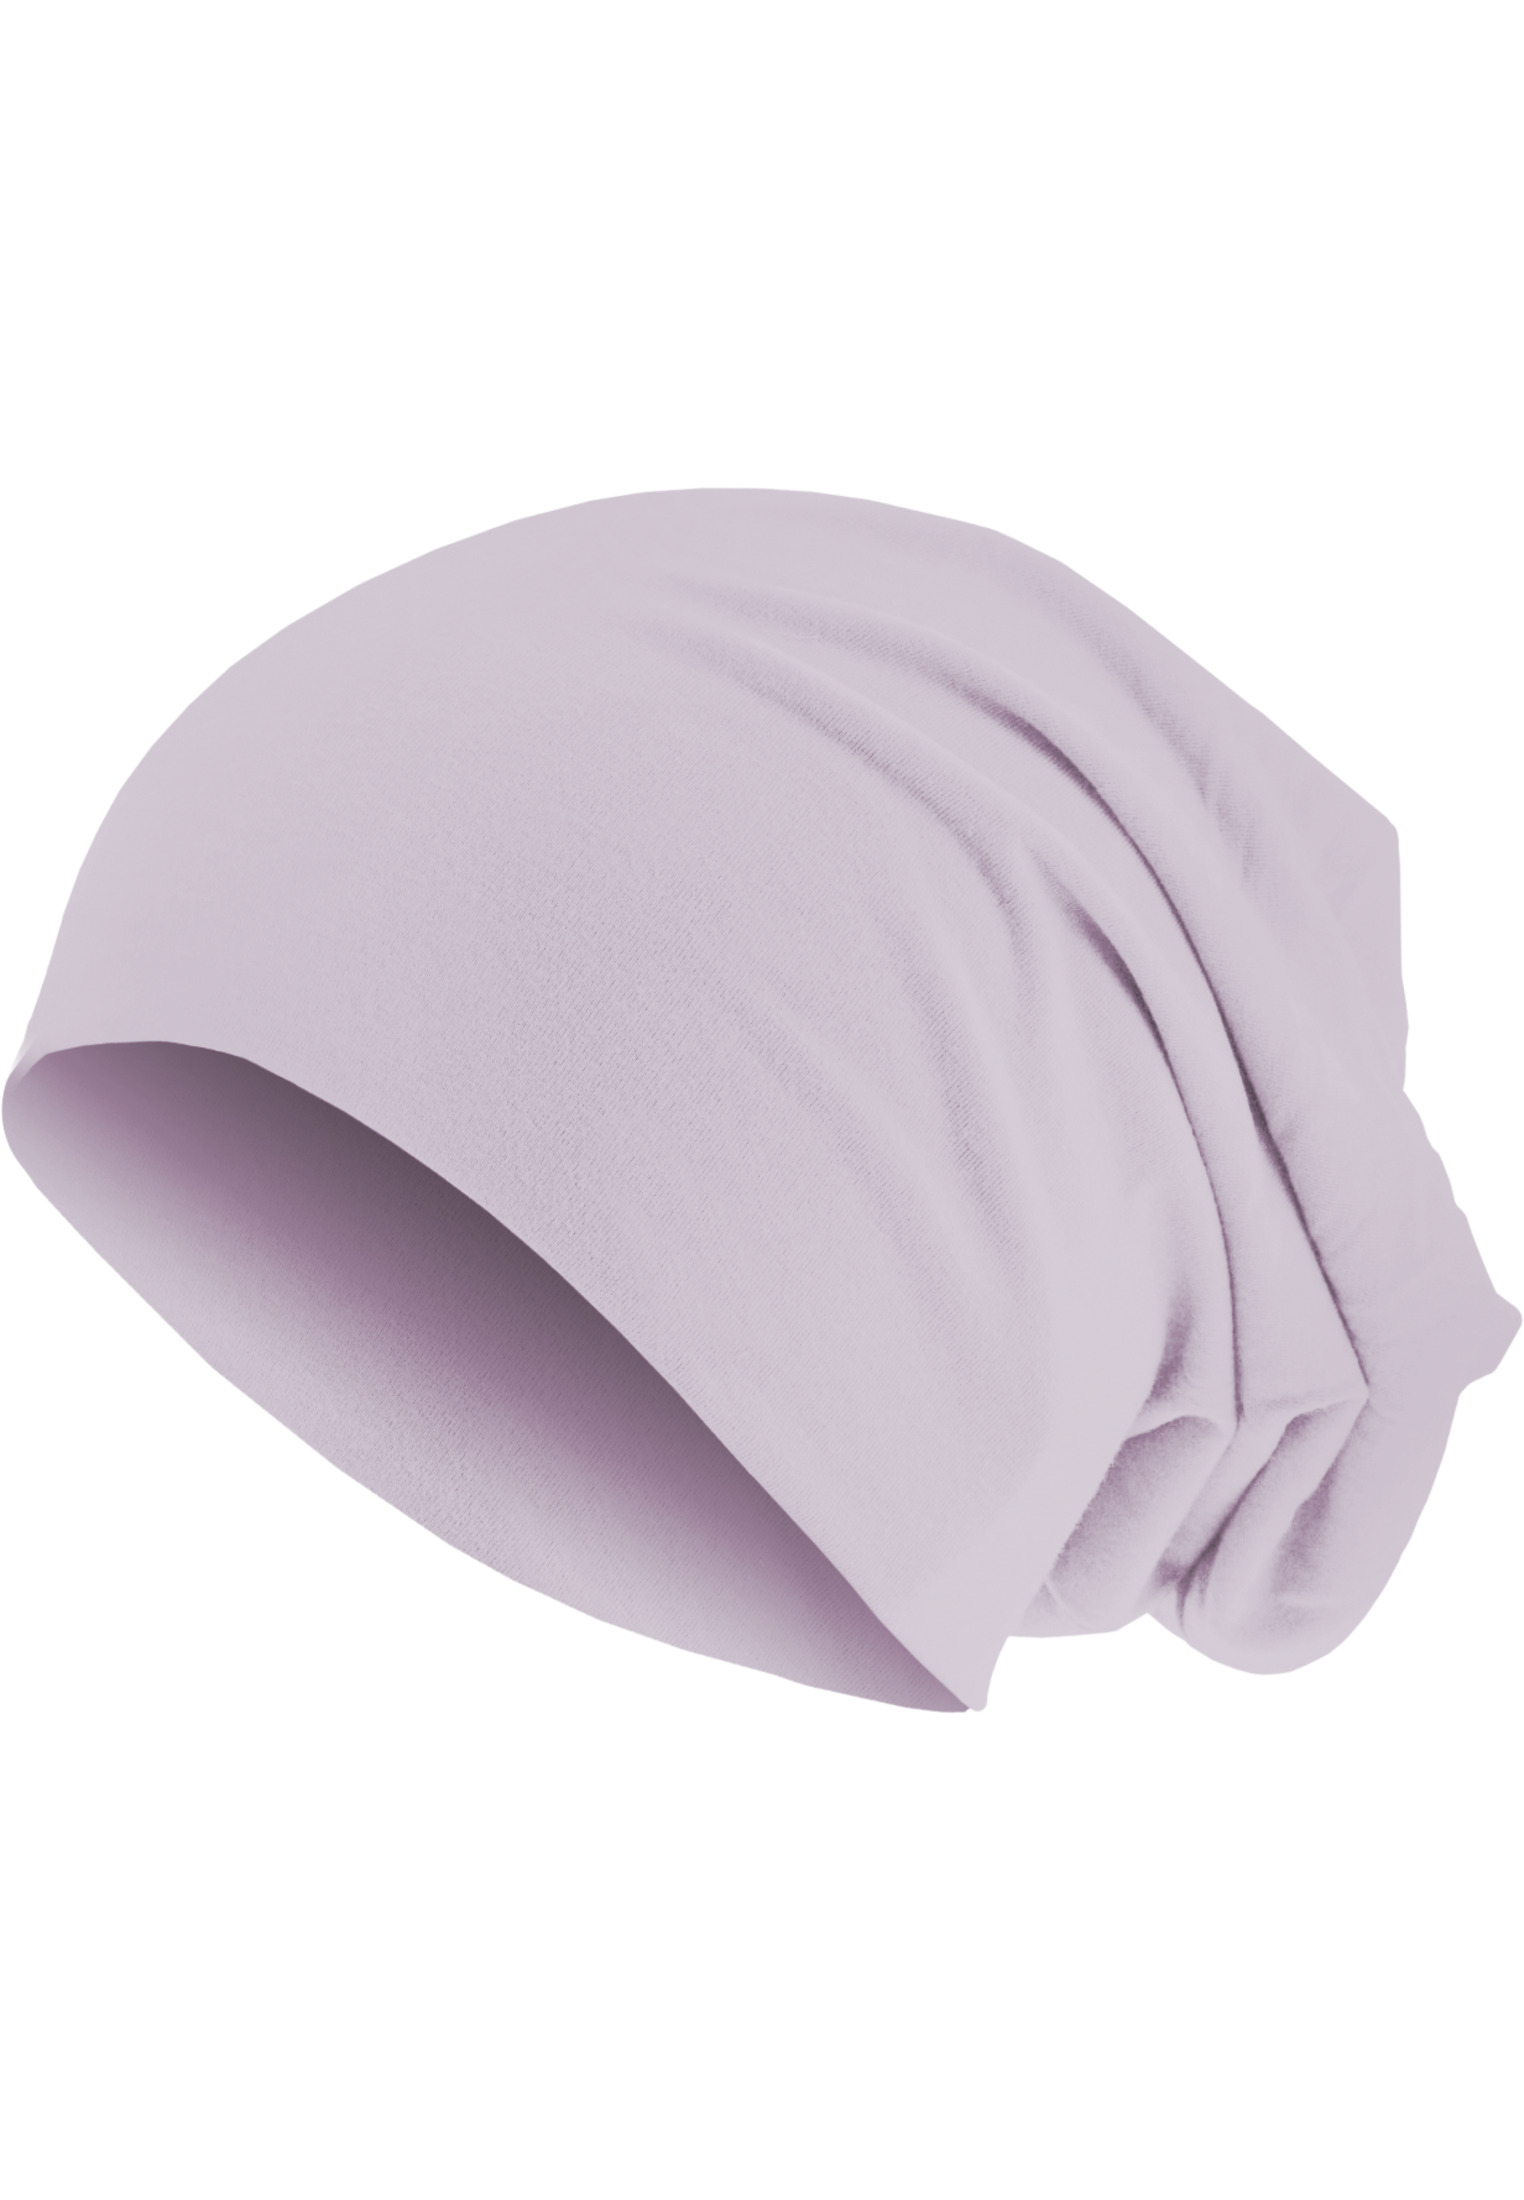 Caps & Beanies Pastel Jersey Beanie in Farbe lavender